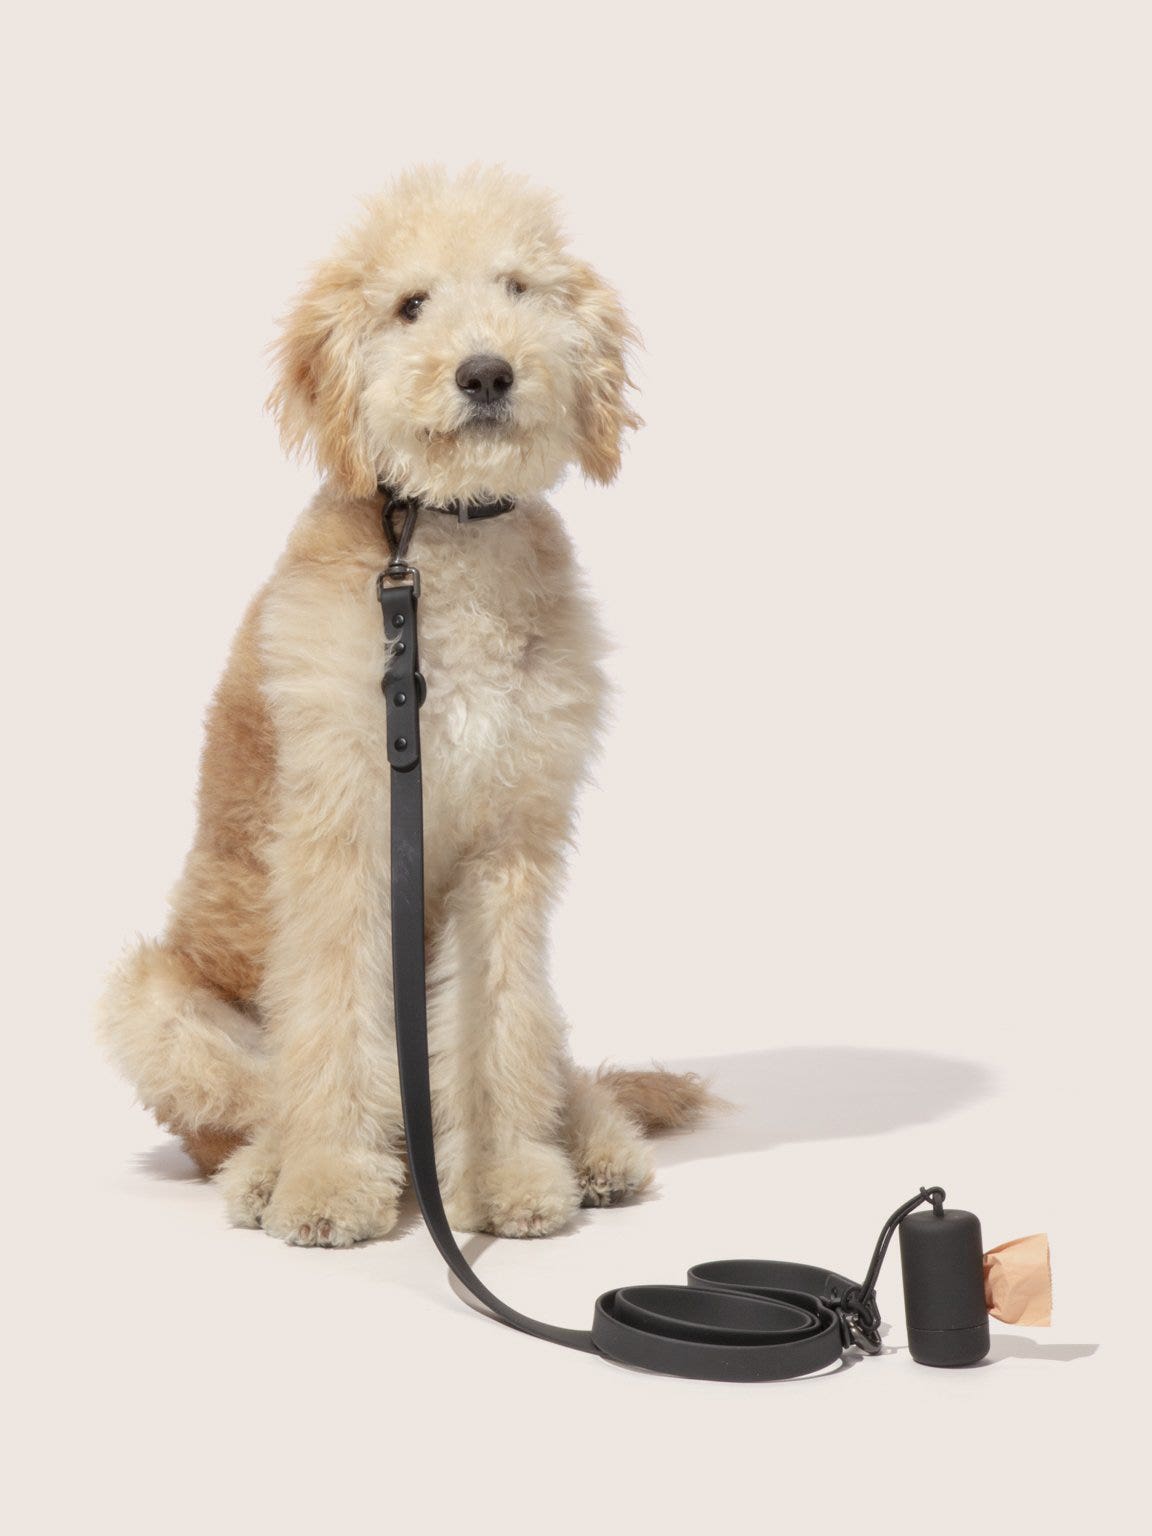 If Everlane and Outdoor Voices Made Pet Accessories, This Is What They Would Look Like